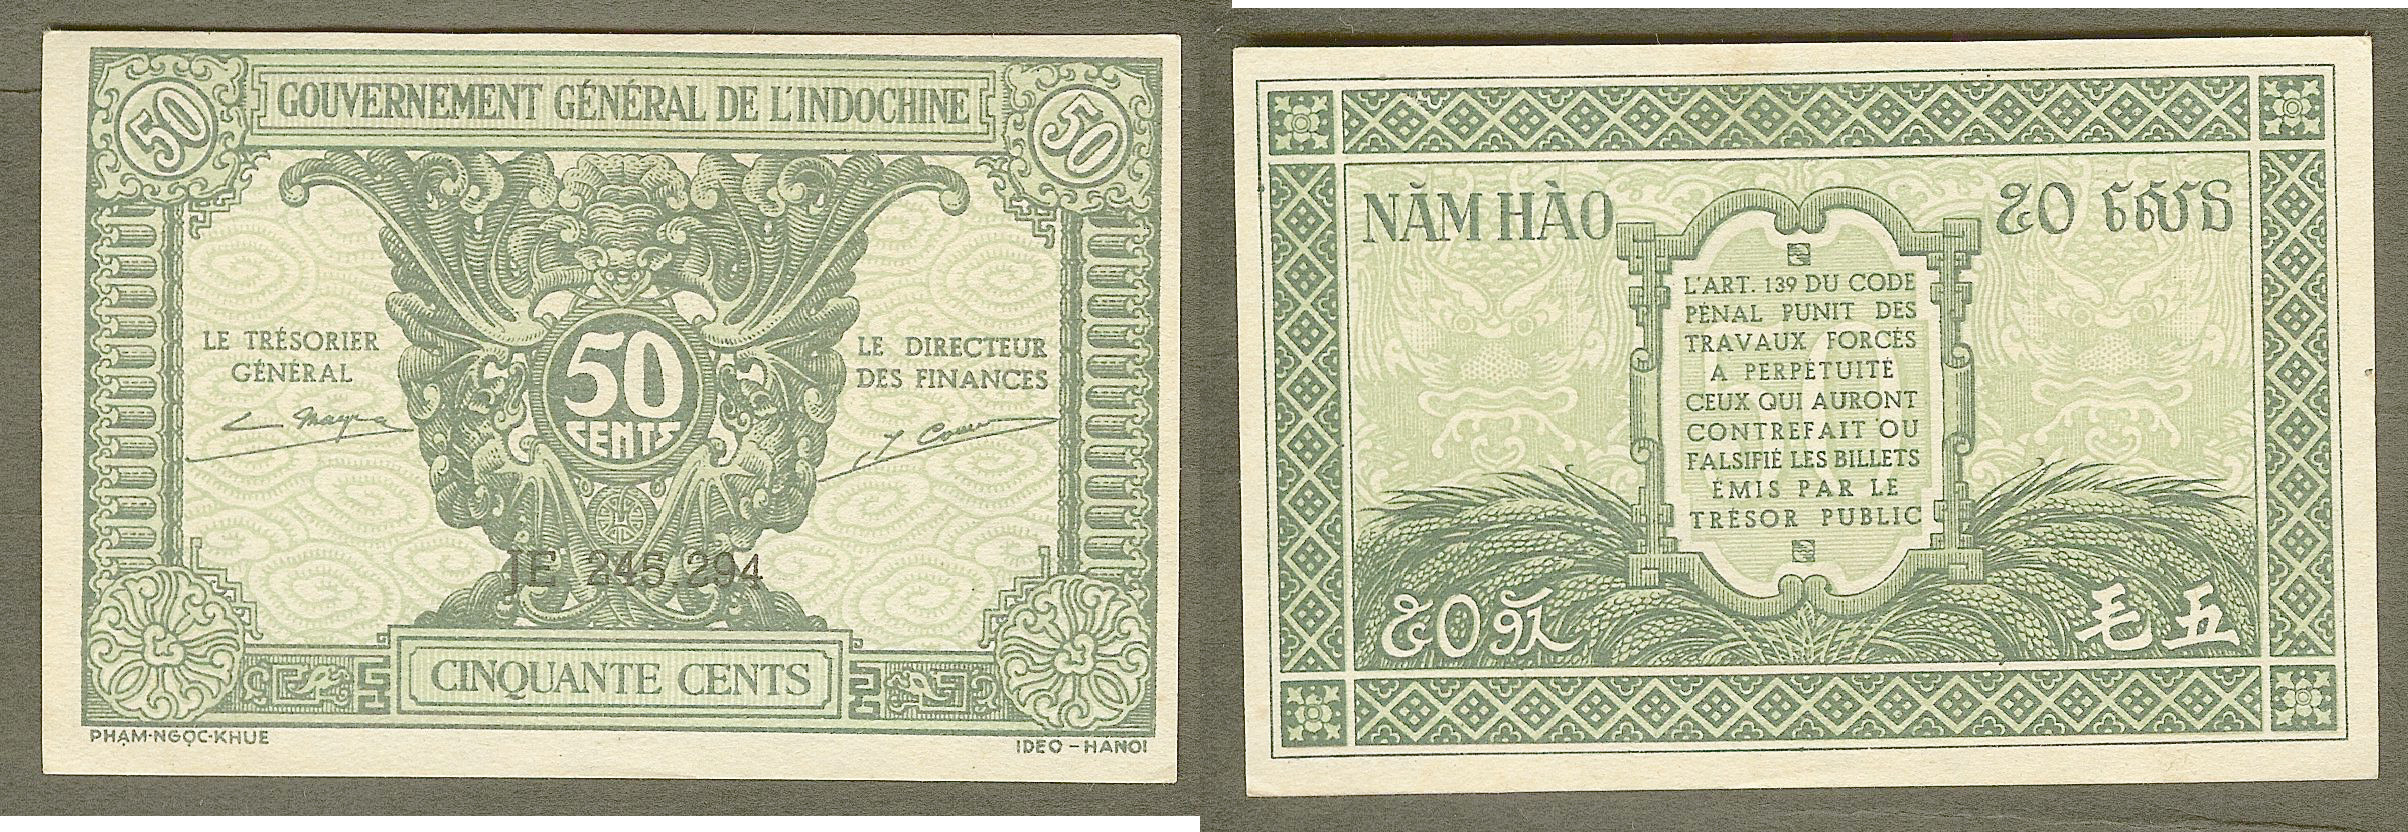 Indochine Francaise 50 centimes 1942 SPL+